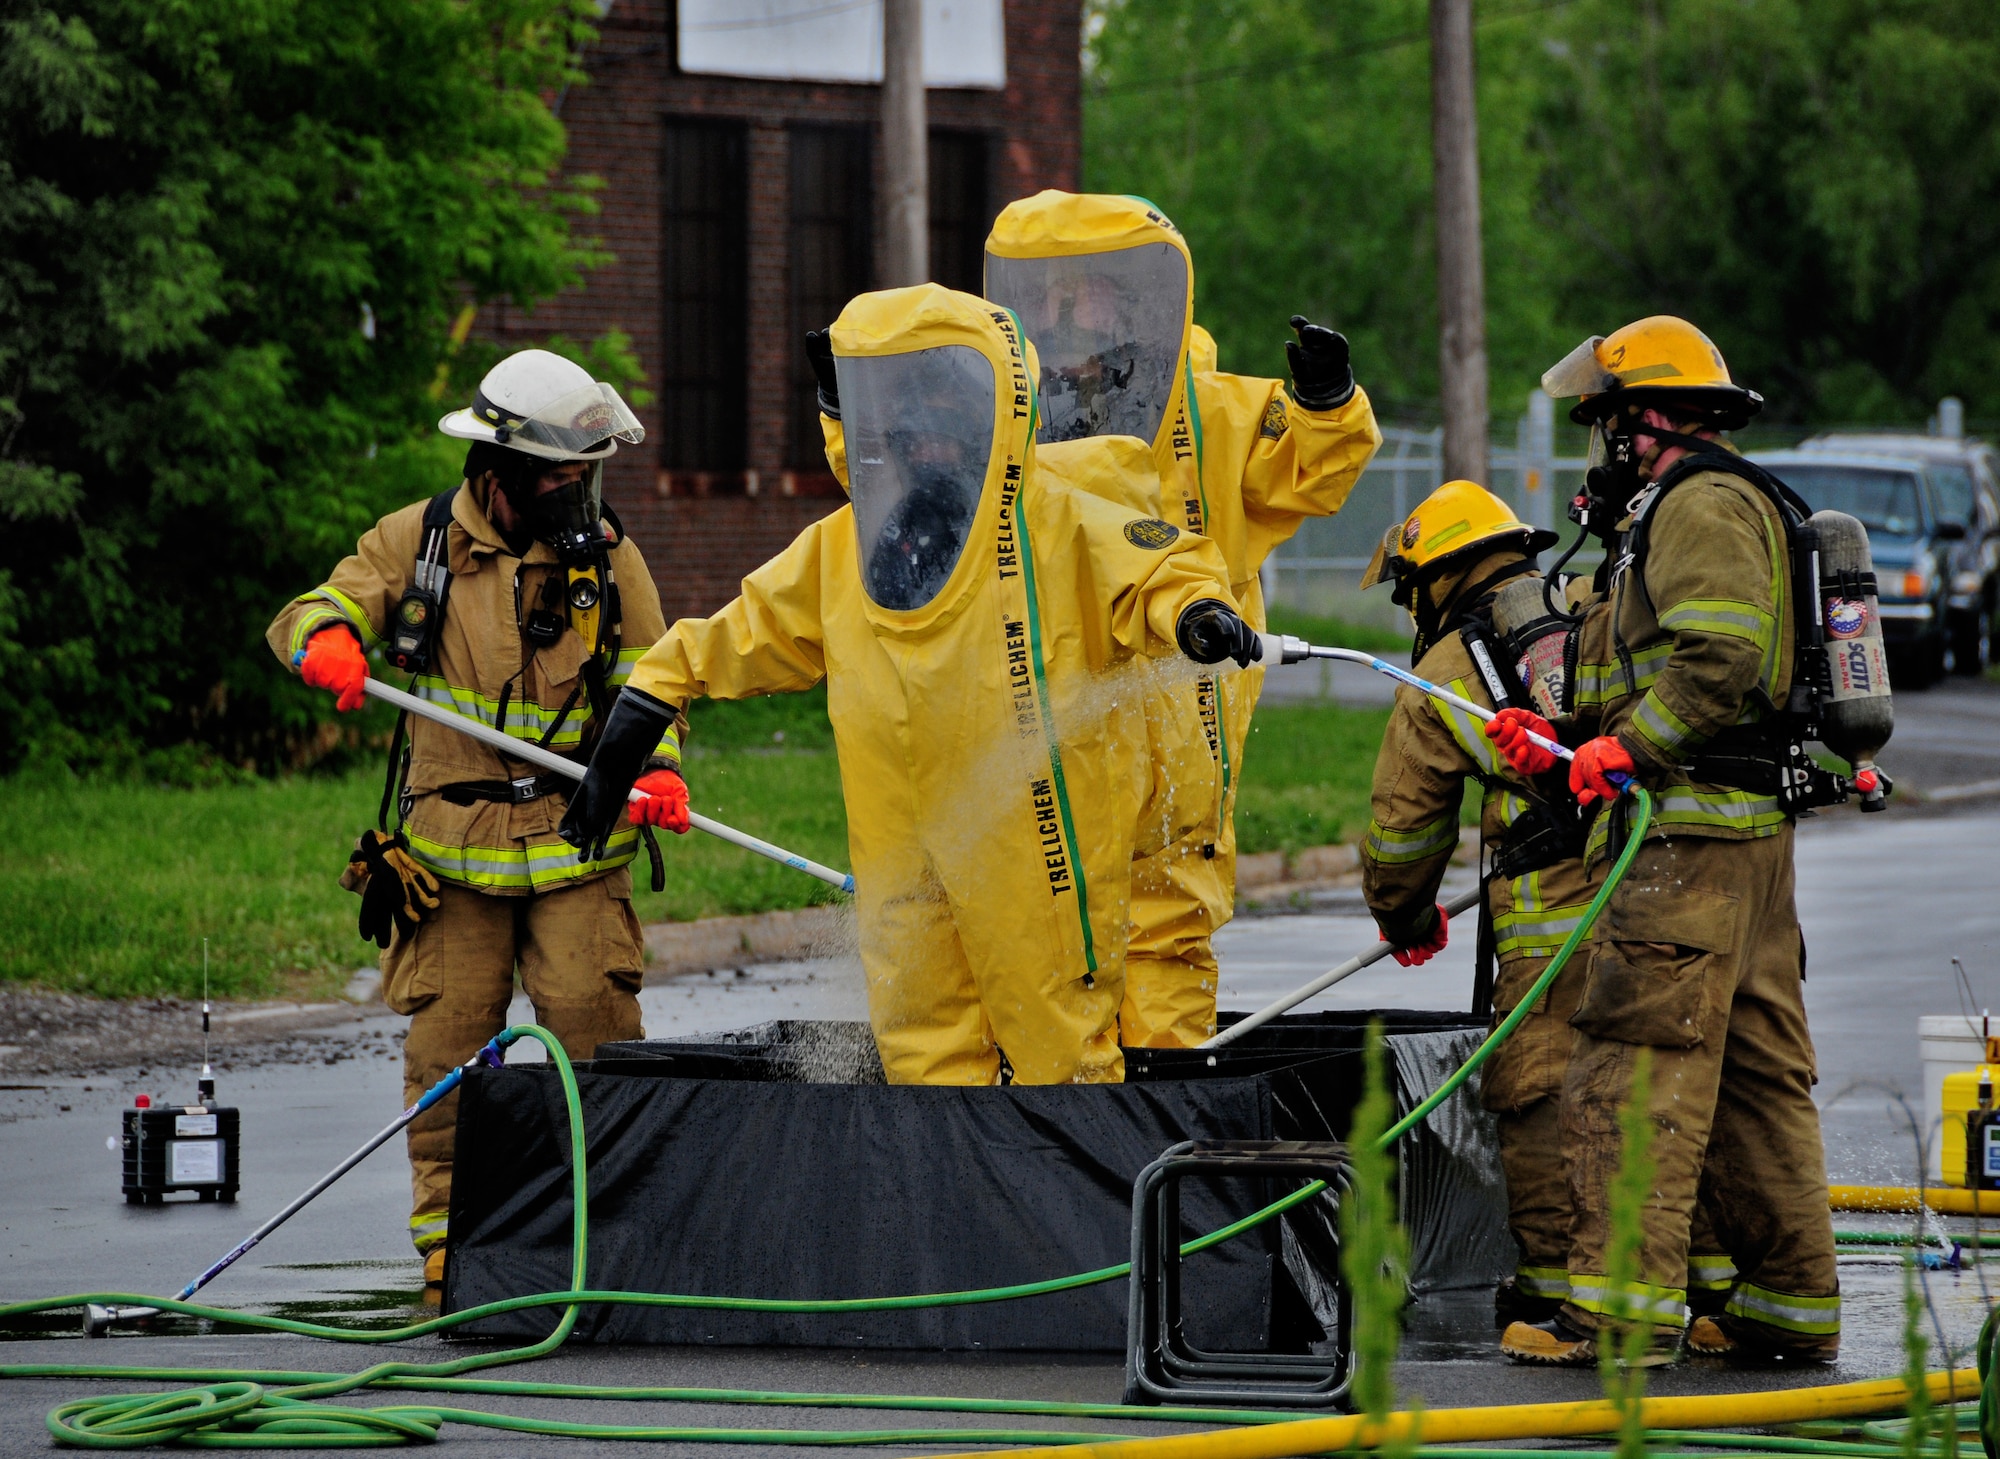 The Niagara Falls Air Reserve Station Fire Department lends support during a hazardous material spill at a chemical plant on Buffalo Ave., May 28, 2010, Niagara Falls, NY. The Niagara Falls Air Reserve Station Fire Department is one of the most current, qualified and trained for hazardous material calls in the Niagara Falls area. (U.S. Air Force photo by Staff Sgt. Joseph McKee)